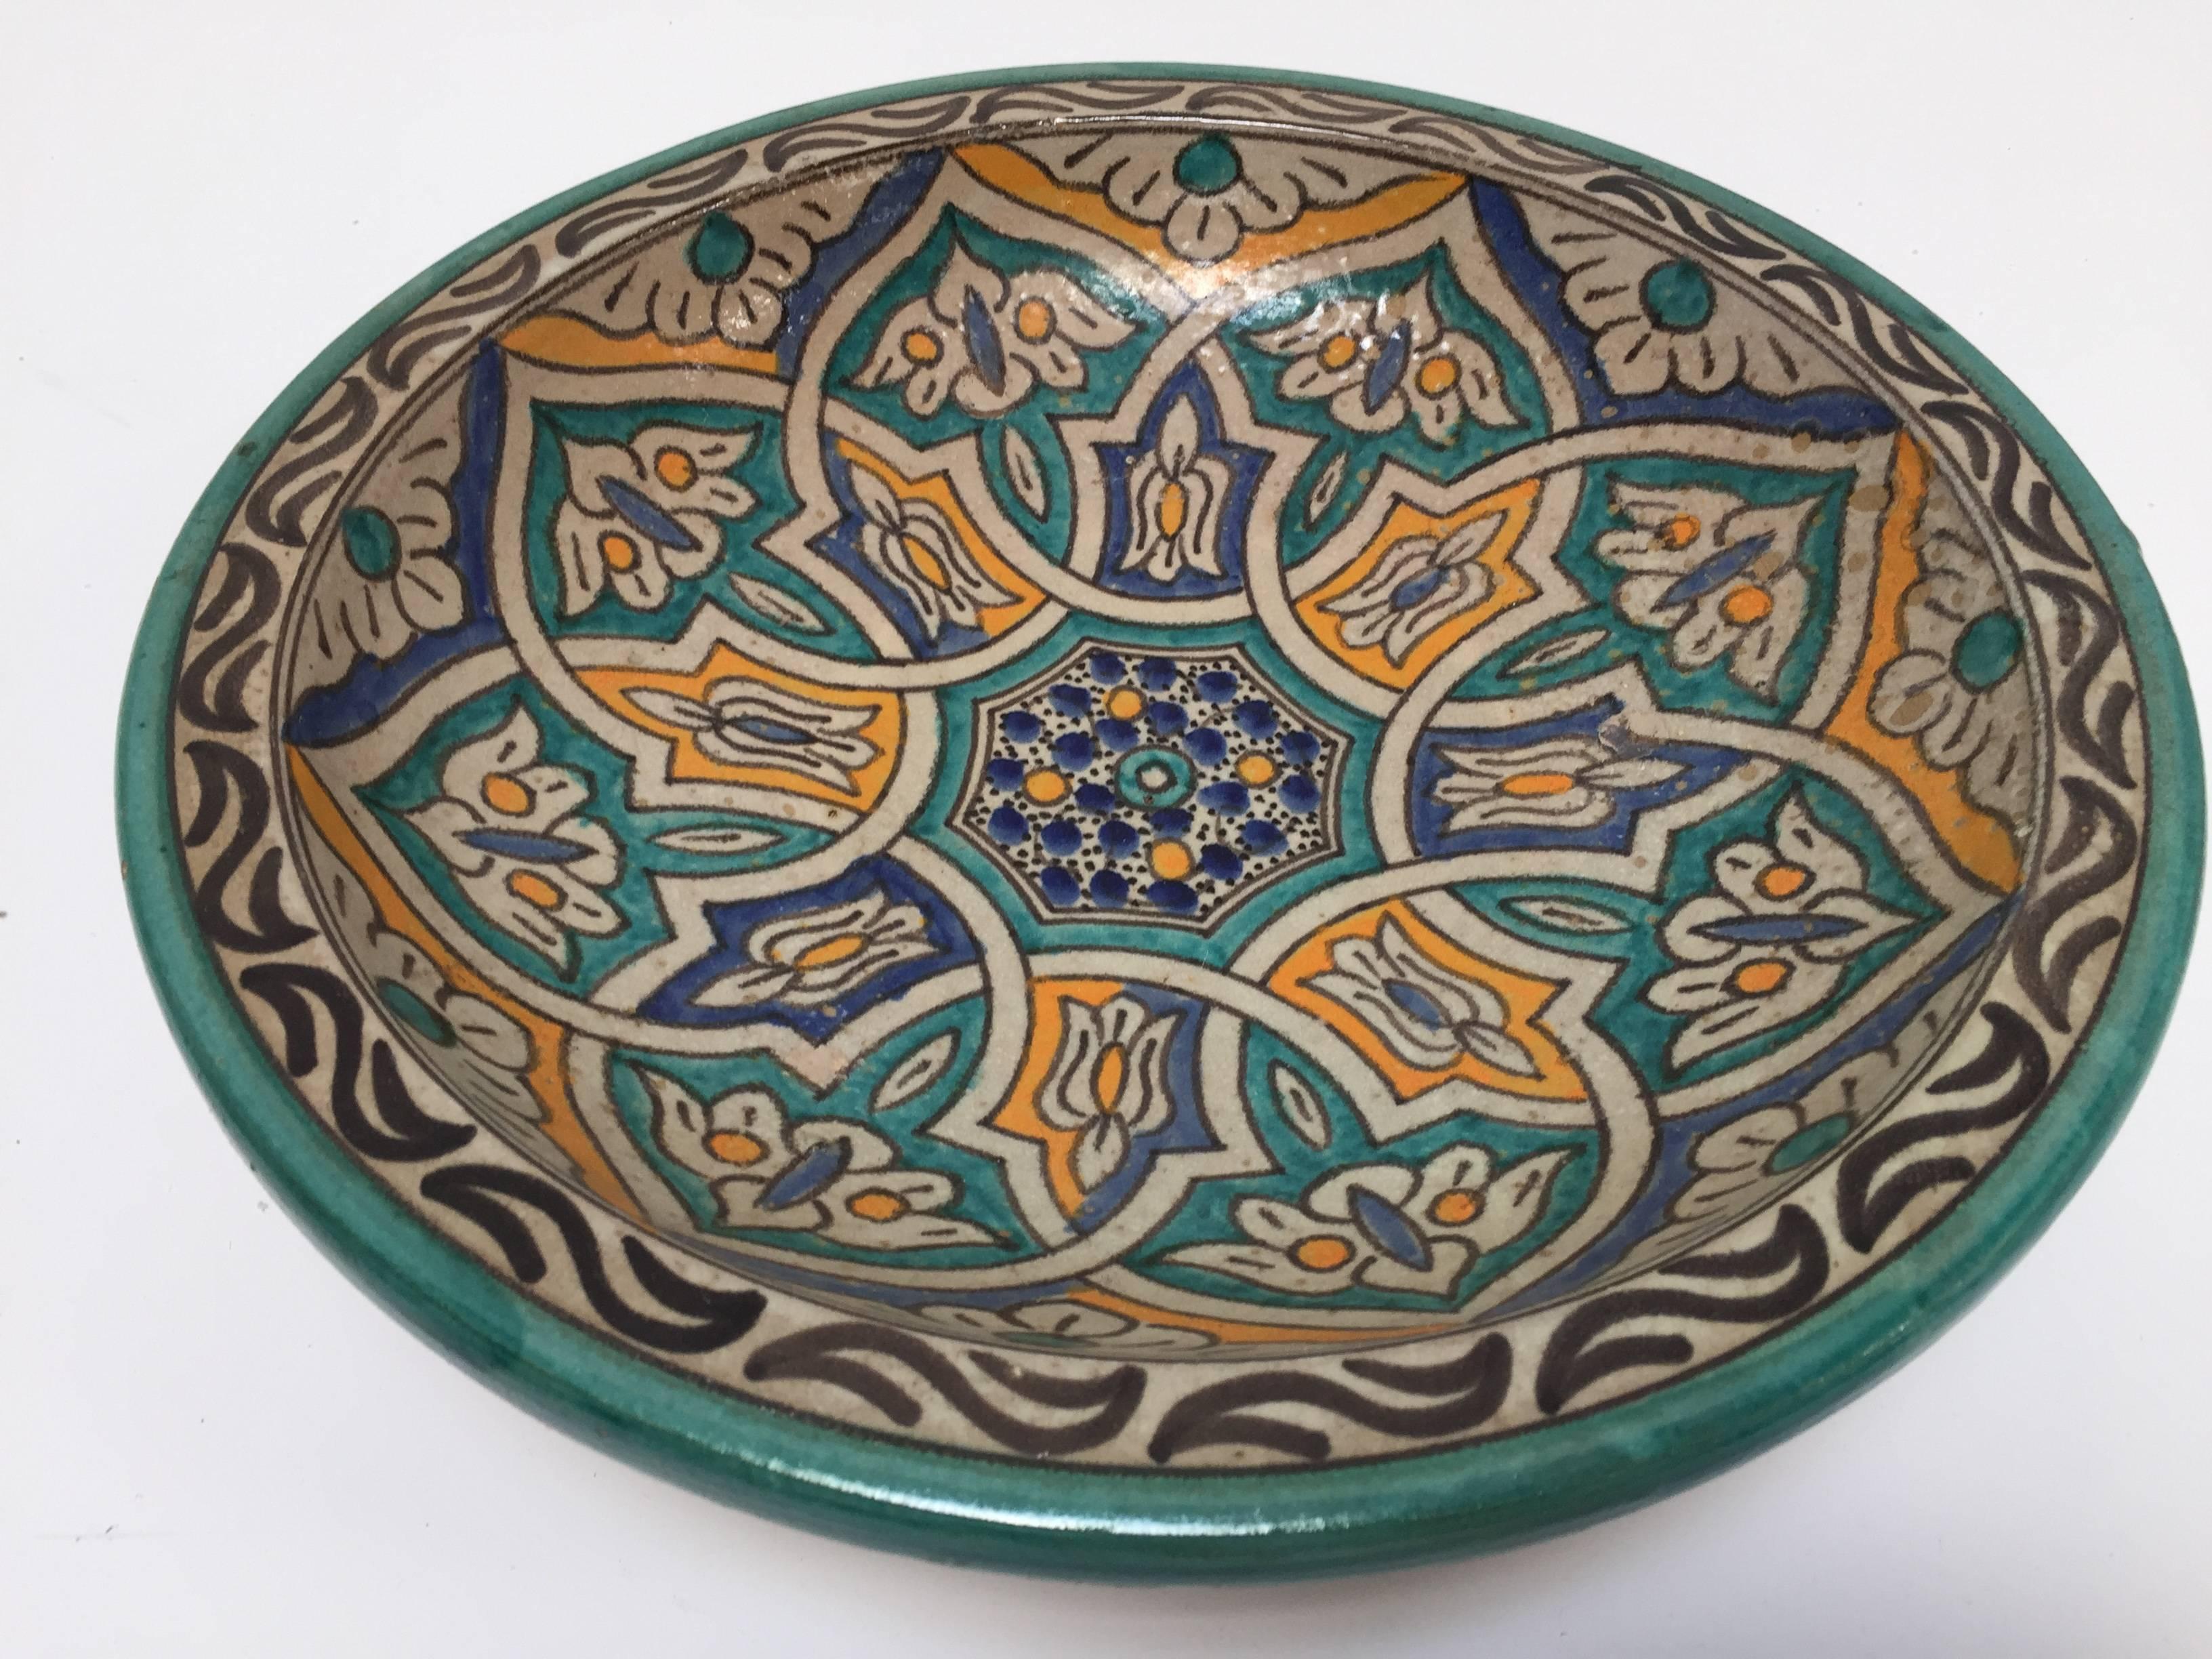 Large Moroccan ceramic bowl handcrafted in Fez by artisans.
Hand-painted ceramic from Fez Morocco.
This kind of Moorish Spanish style ceramic artwork could be found at the Alhambra palace in Granada Spain.
Turquoise, blue, safran yellow and ivory